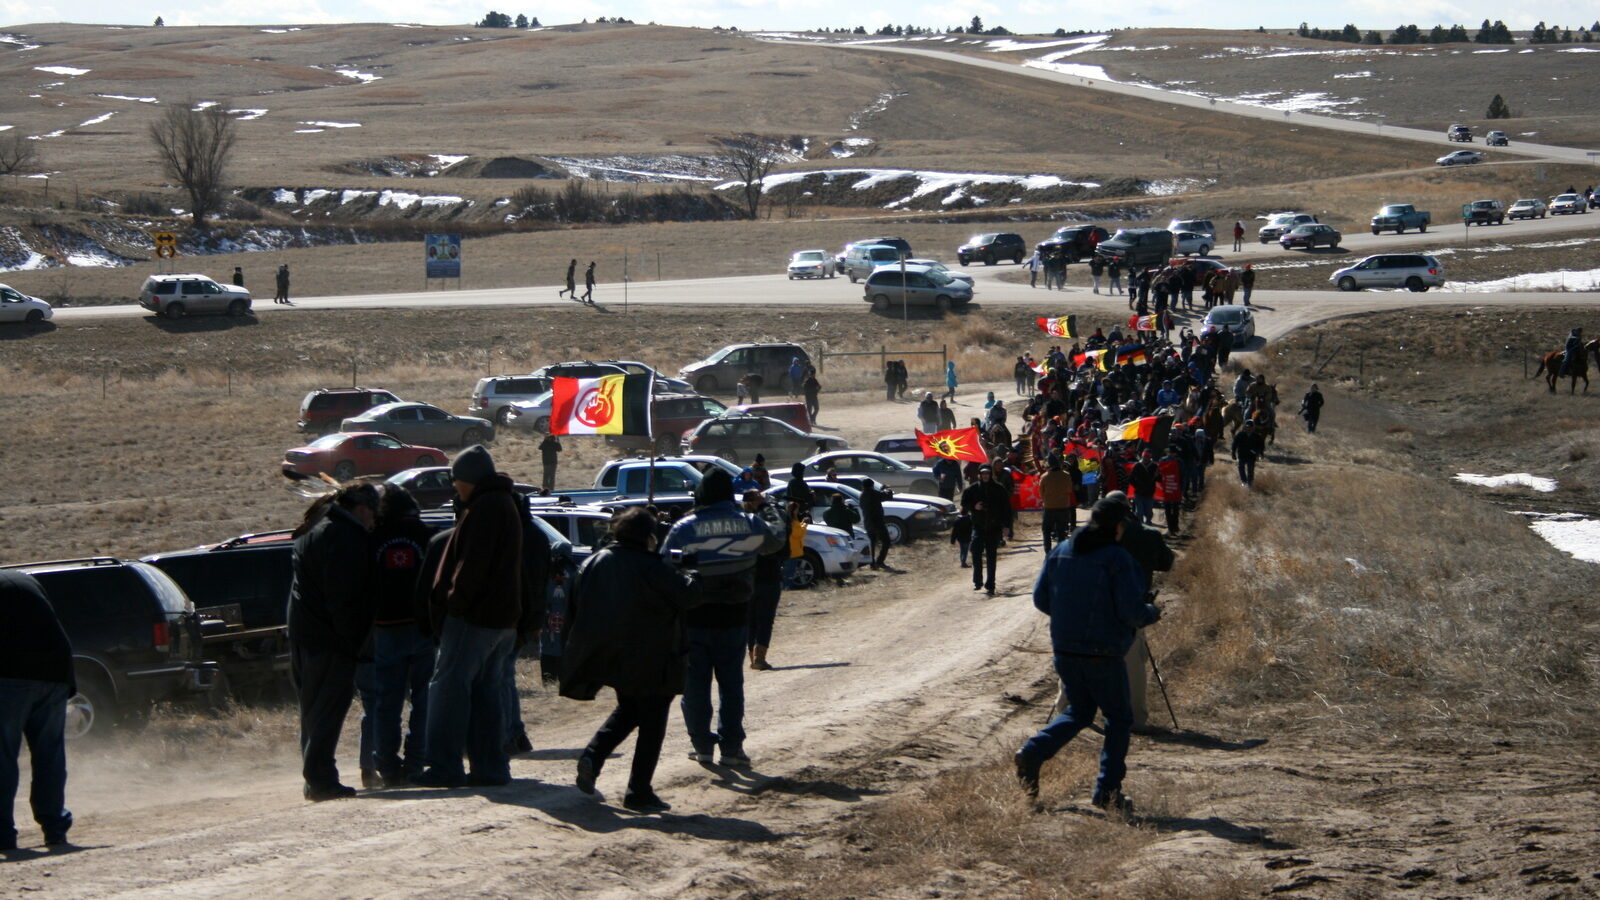 Members of the American Indian Movement walk to the Wounded Knee Massacre Monument Wednesday, Feb. 27, 2013 in Wounded Knee, S.D. (AP Photo/Kristi Eaton)